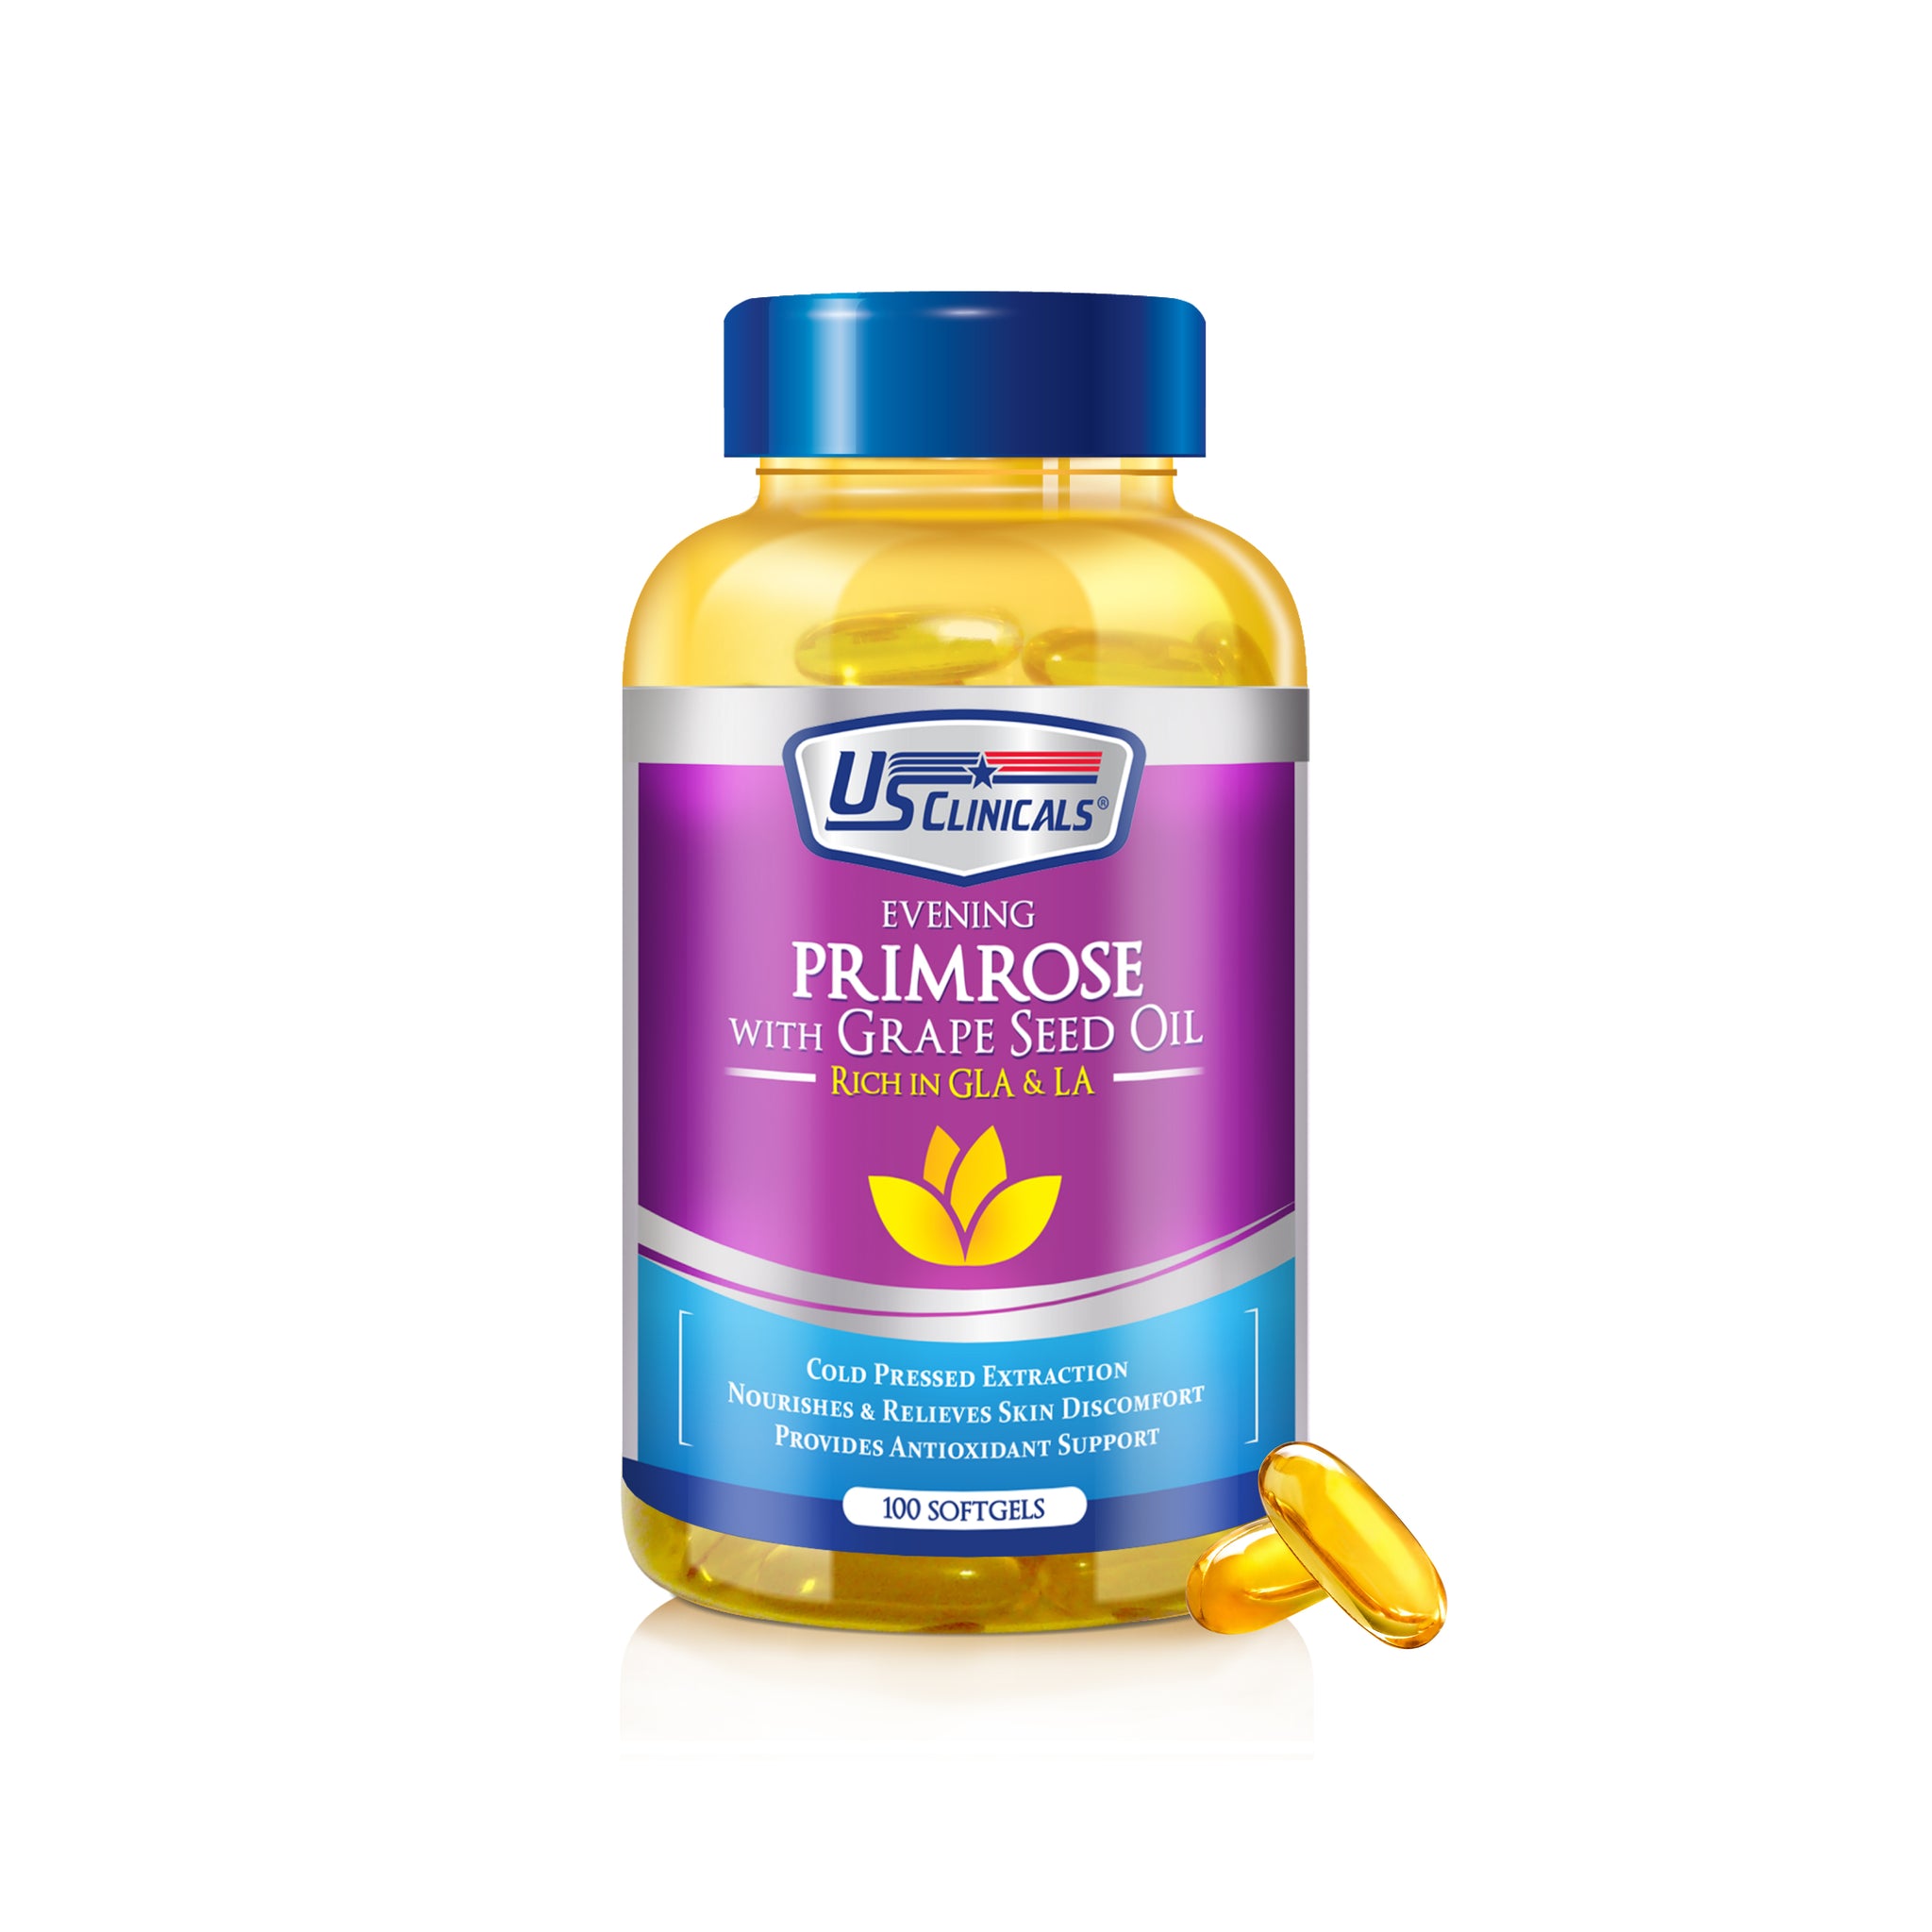 US Clinicals® Evening Primrose with Grape Seed Oil.